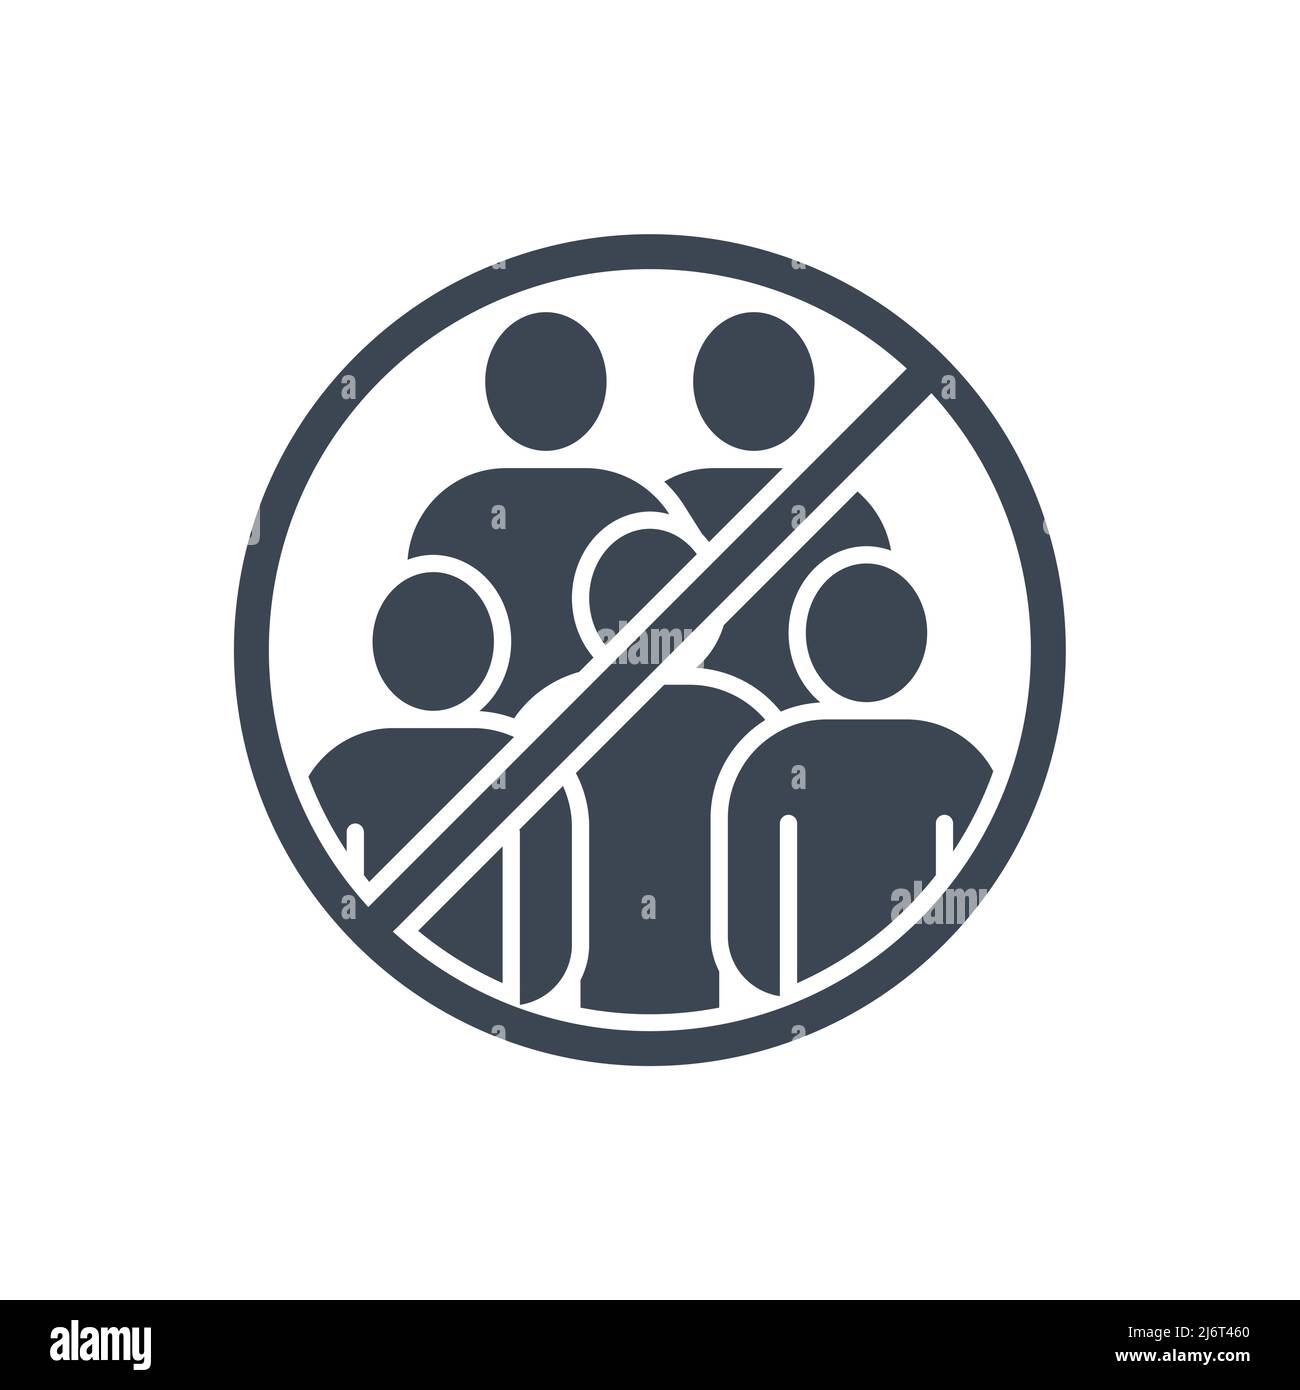 Avoid crowded places related vector glyph icon. Group of people in prohibition sign. Isolated on white background. Editable vector illustration Stock Vector